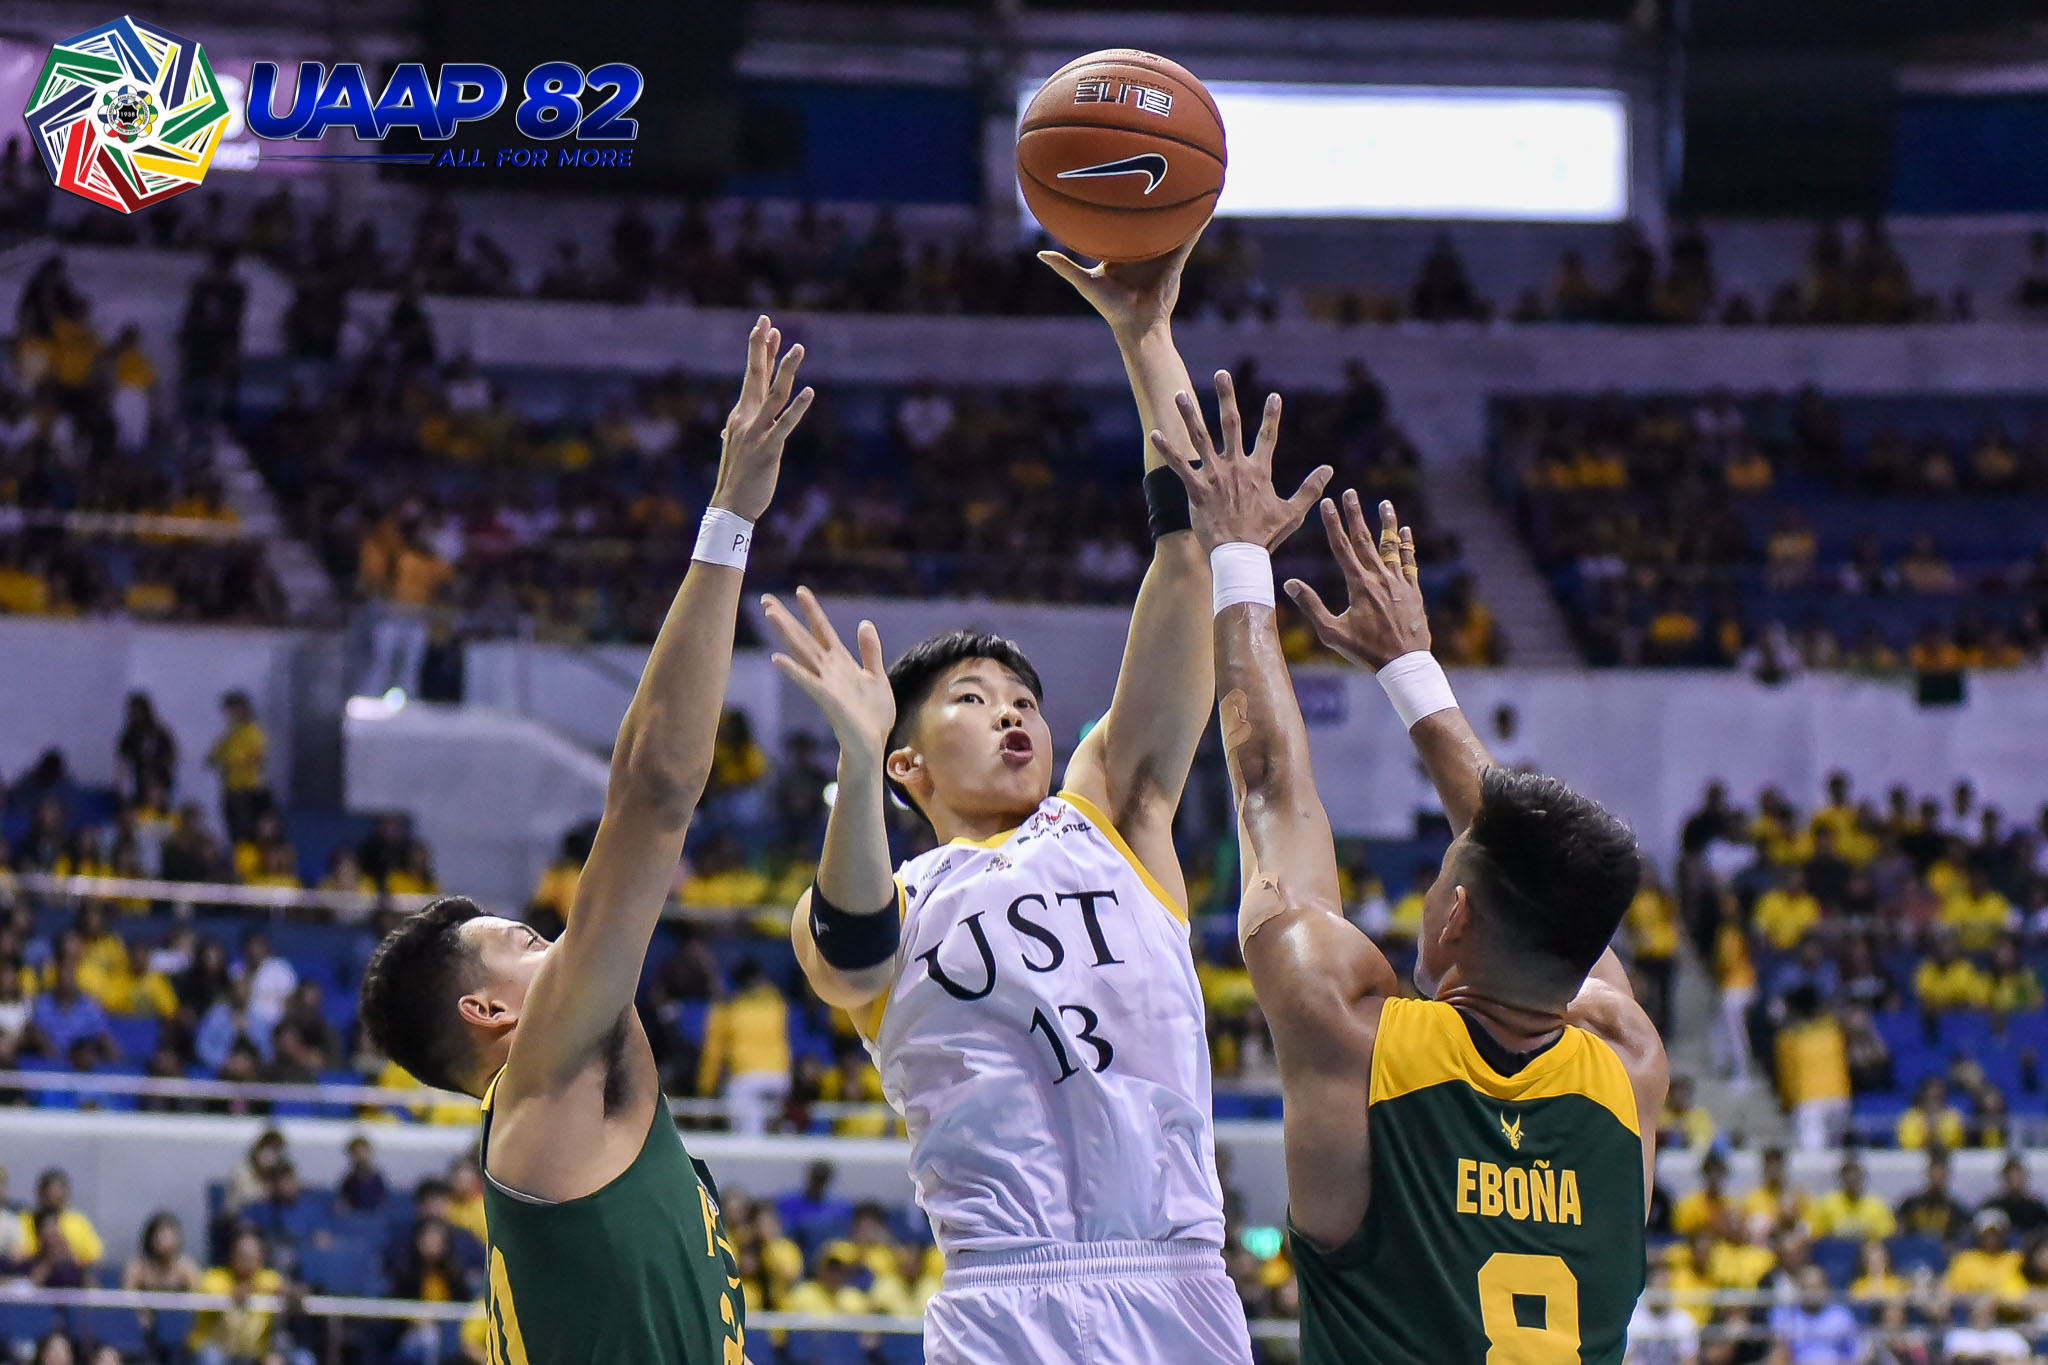 UST outlasts FEU, moves on to face second-seed UP